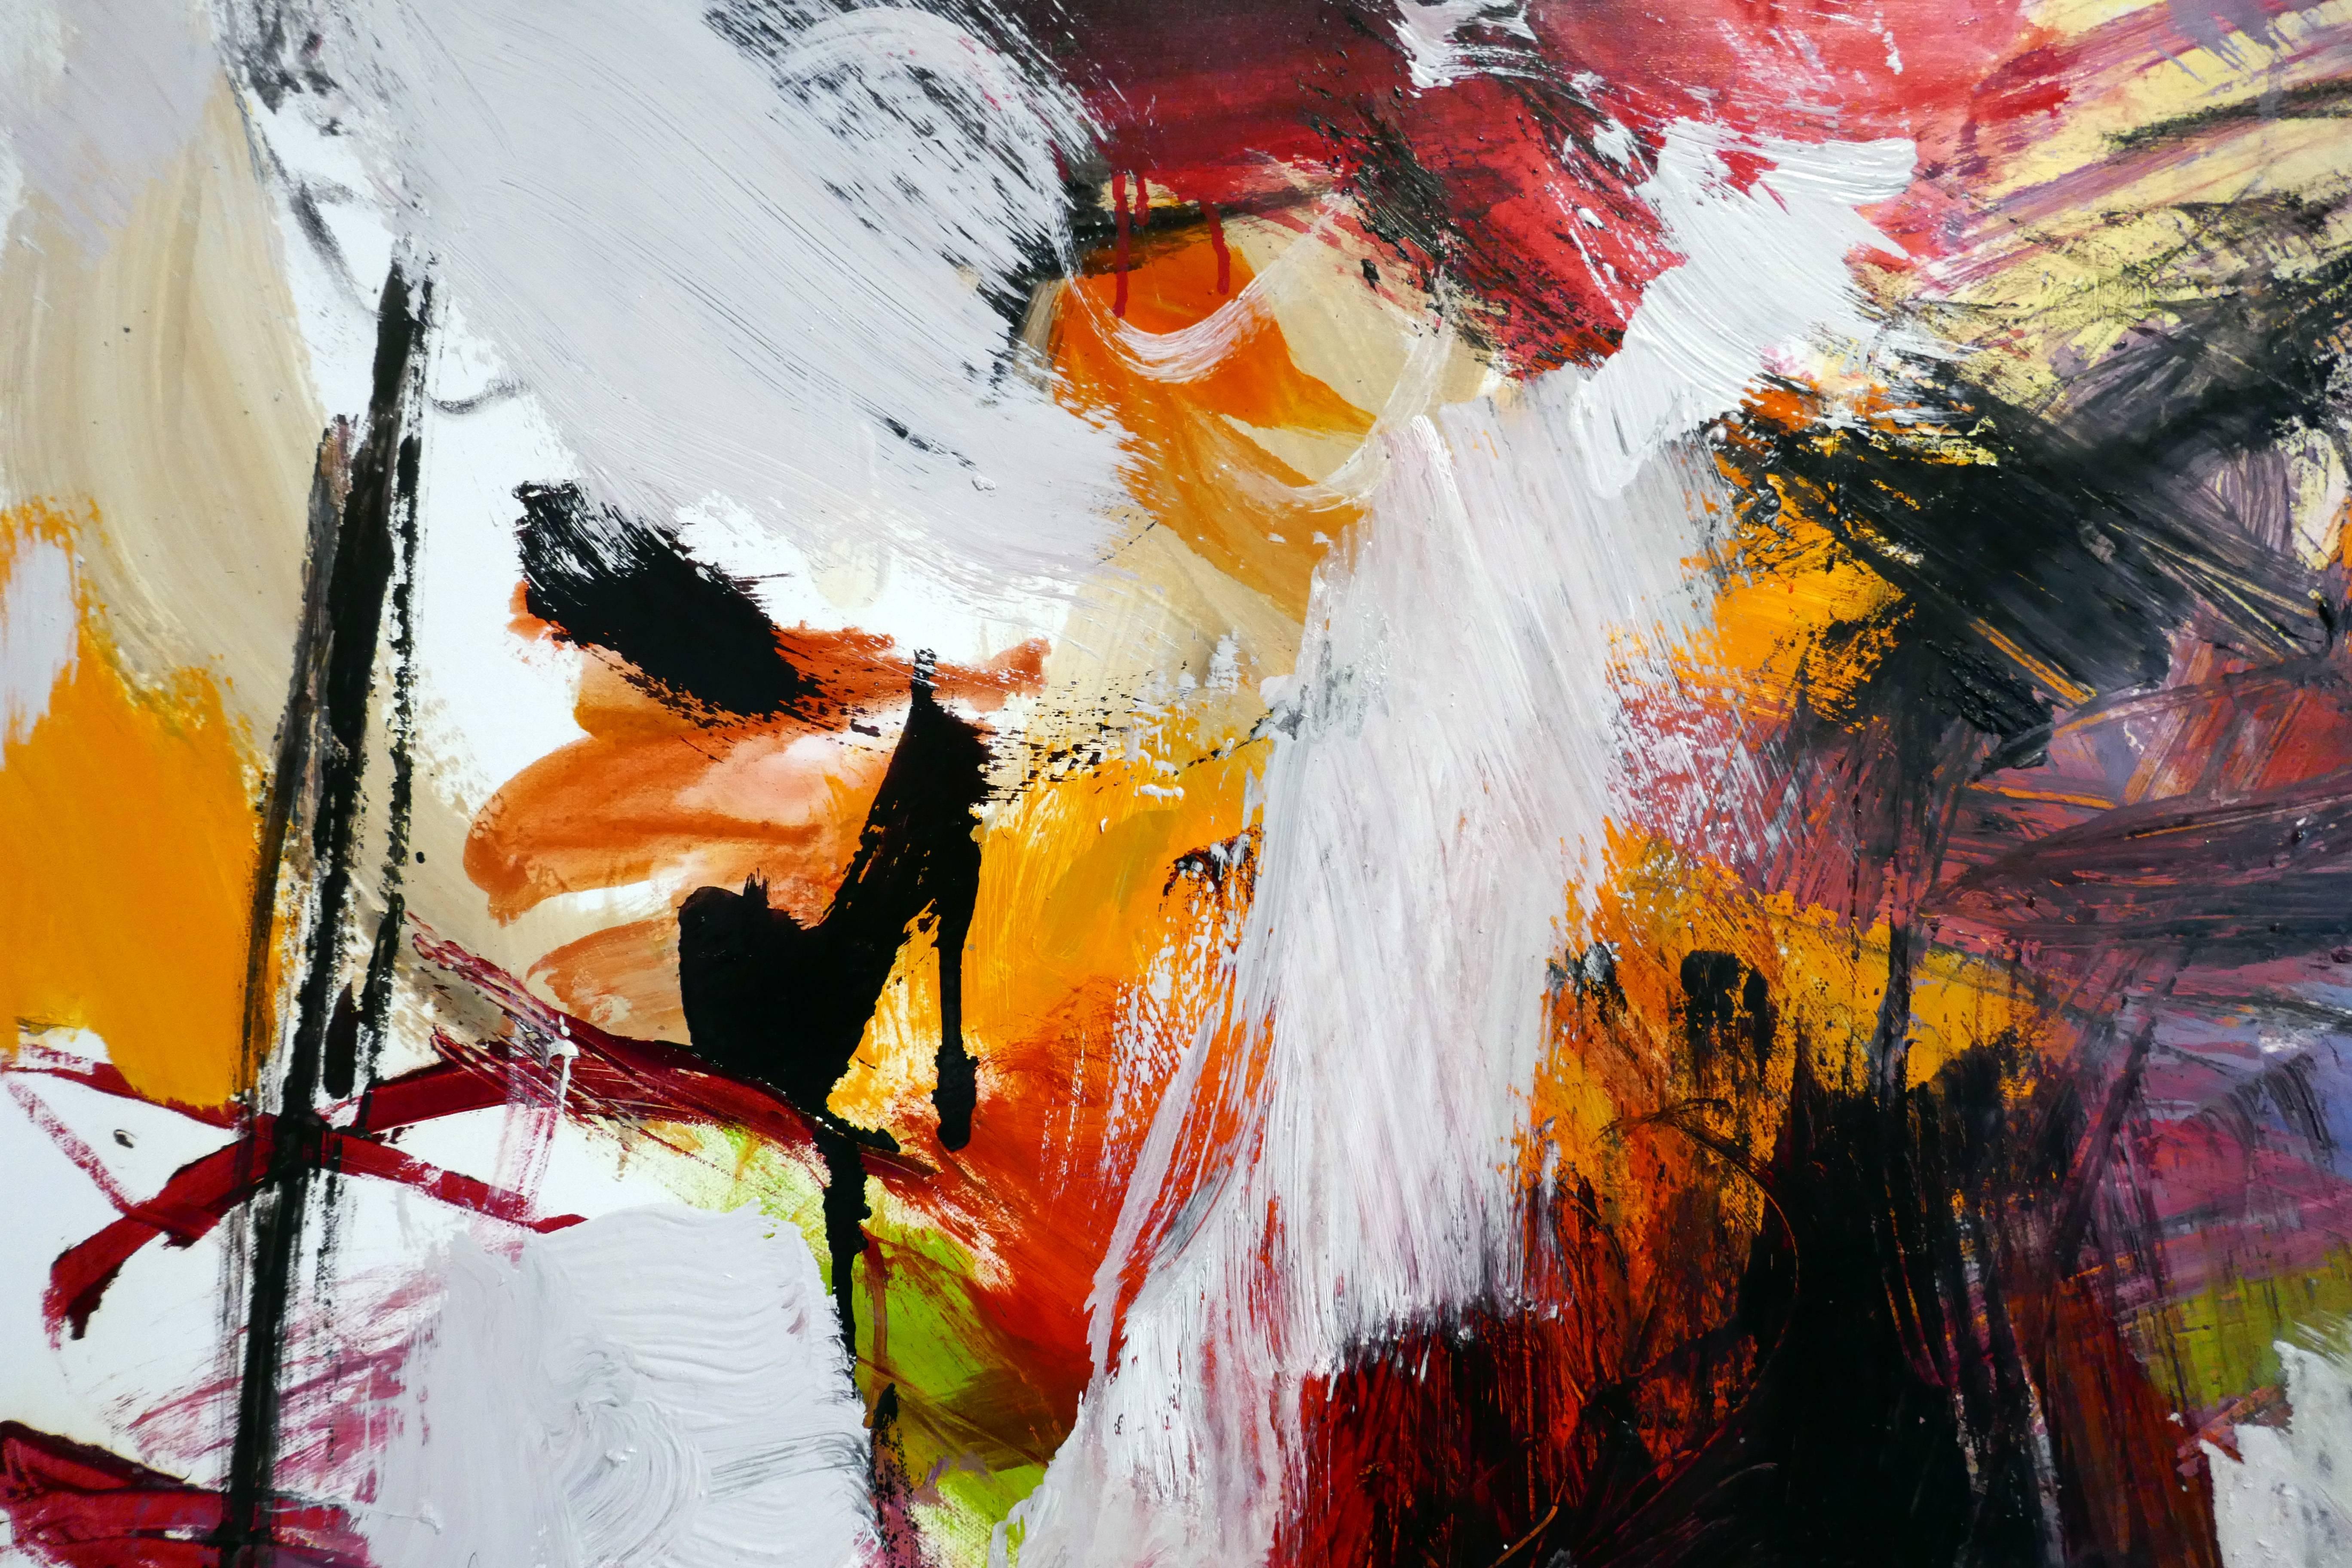 Ouvert No 11 - large, vibrant, colourful, gestural abstract, oil on canvas - Contemporary Painting by Scott Pattinson